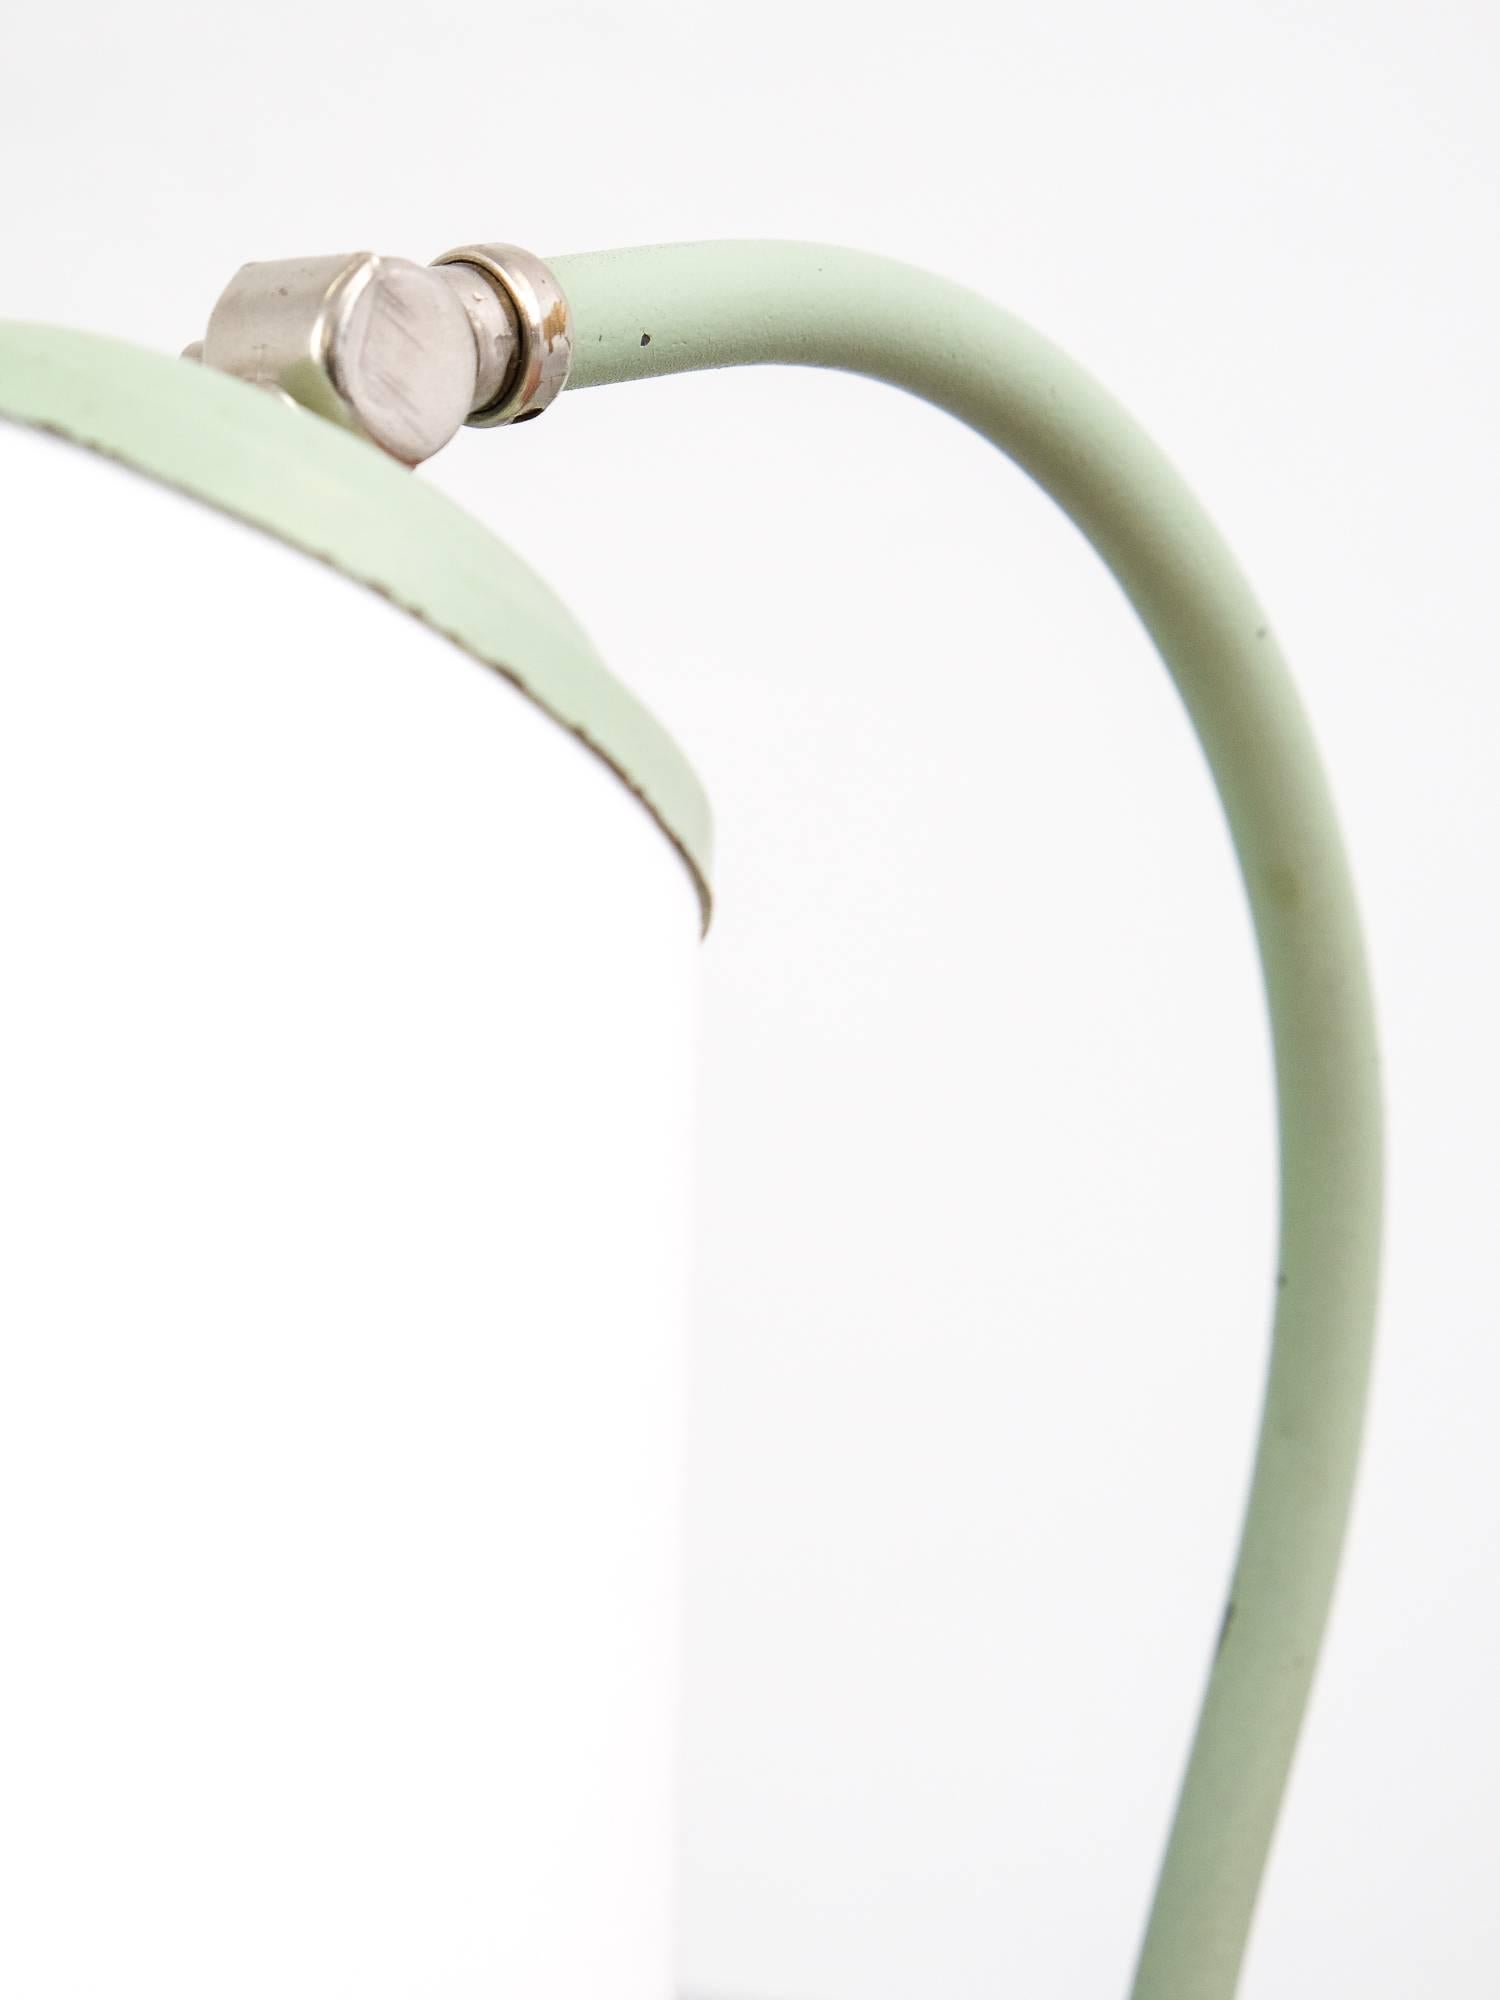 Mid-20th Century 1950s Mint Green Table Lamp by Oy Taito Ab, Model 5228